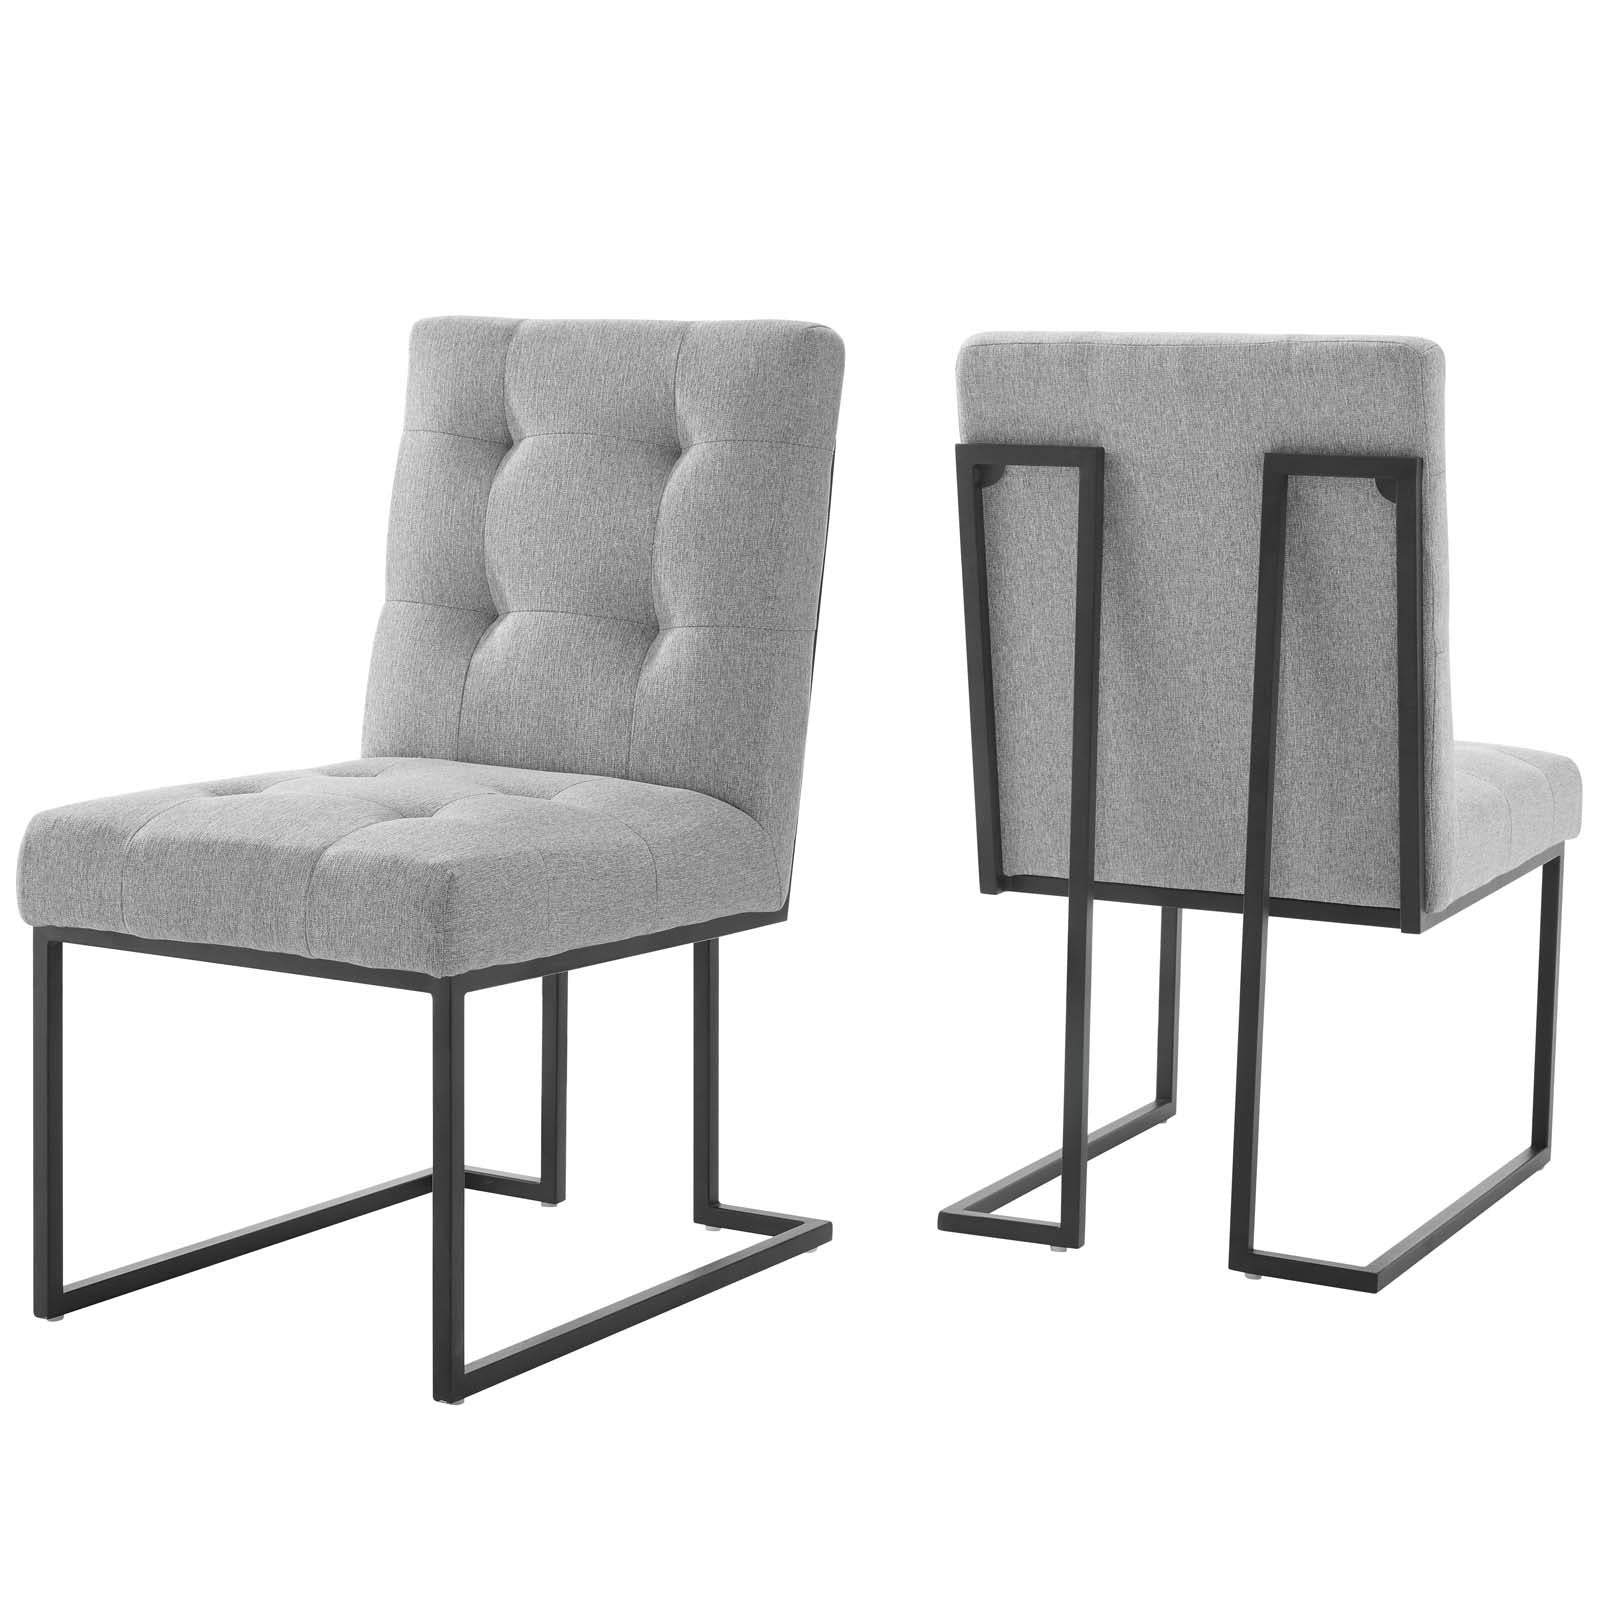 Privy Black Stainless Steel Upholstered Fabric Dining Chair Set of 2 - East Shore Modern Home Furnishings